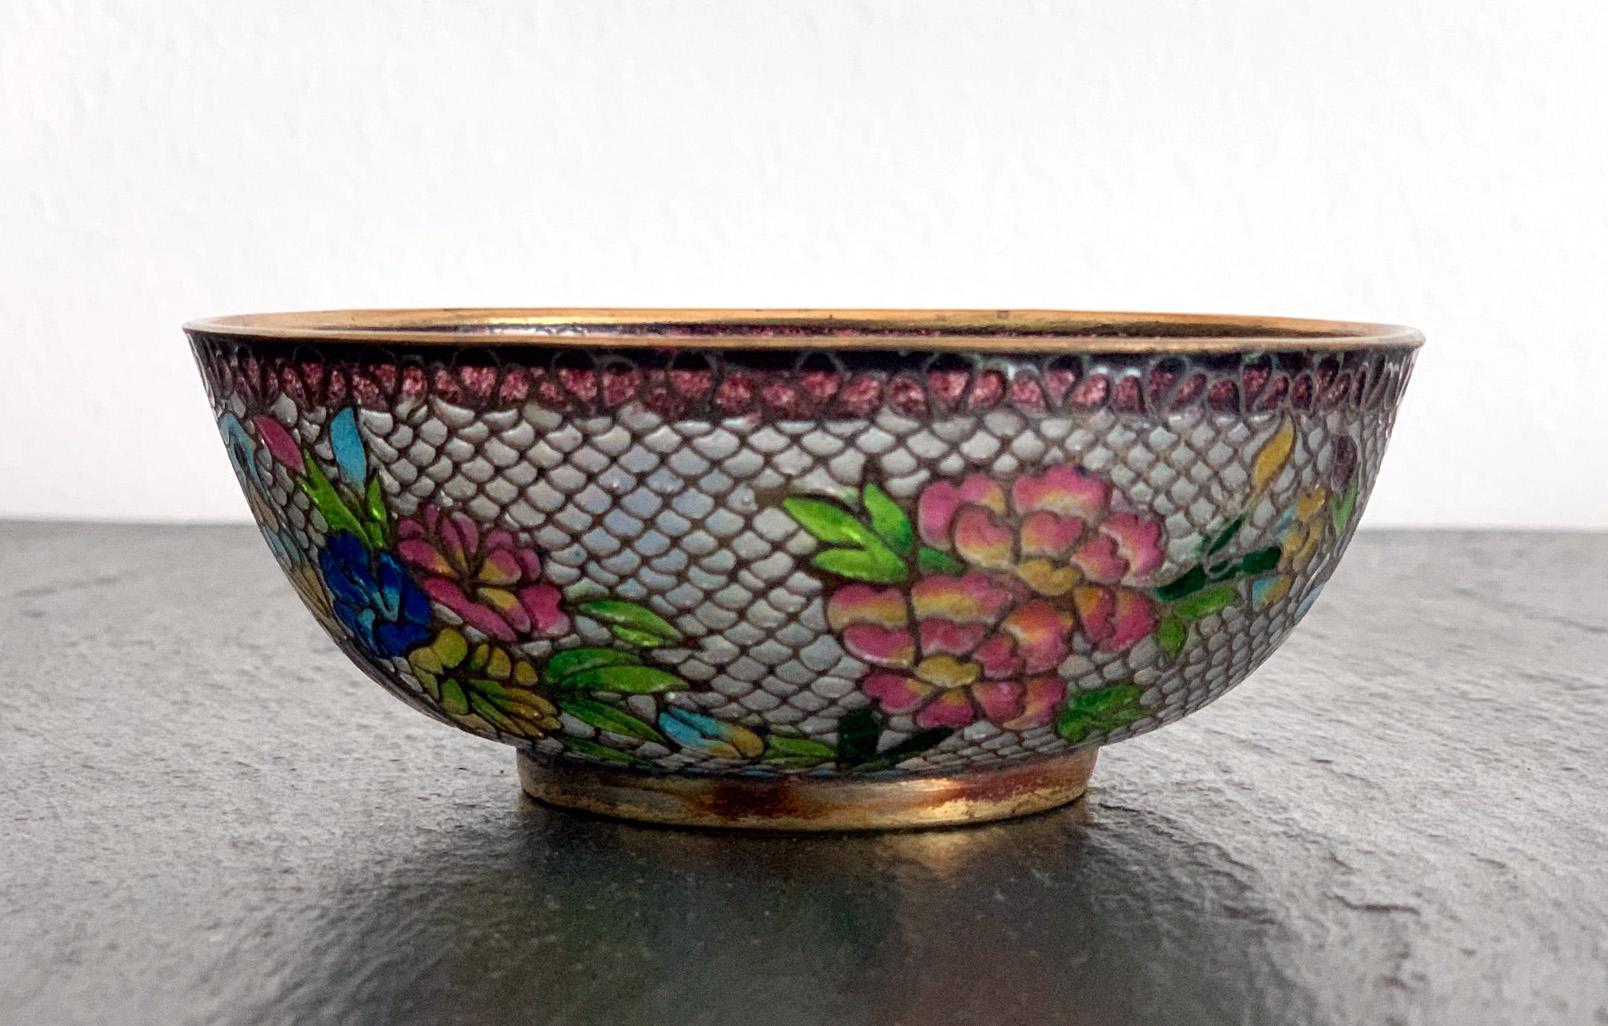 A small Chinese cloisonne enamel bowl made with the technique of Plique-a-jour (means 